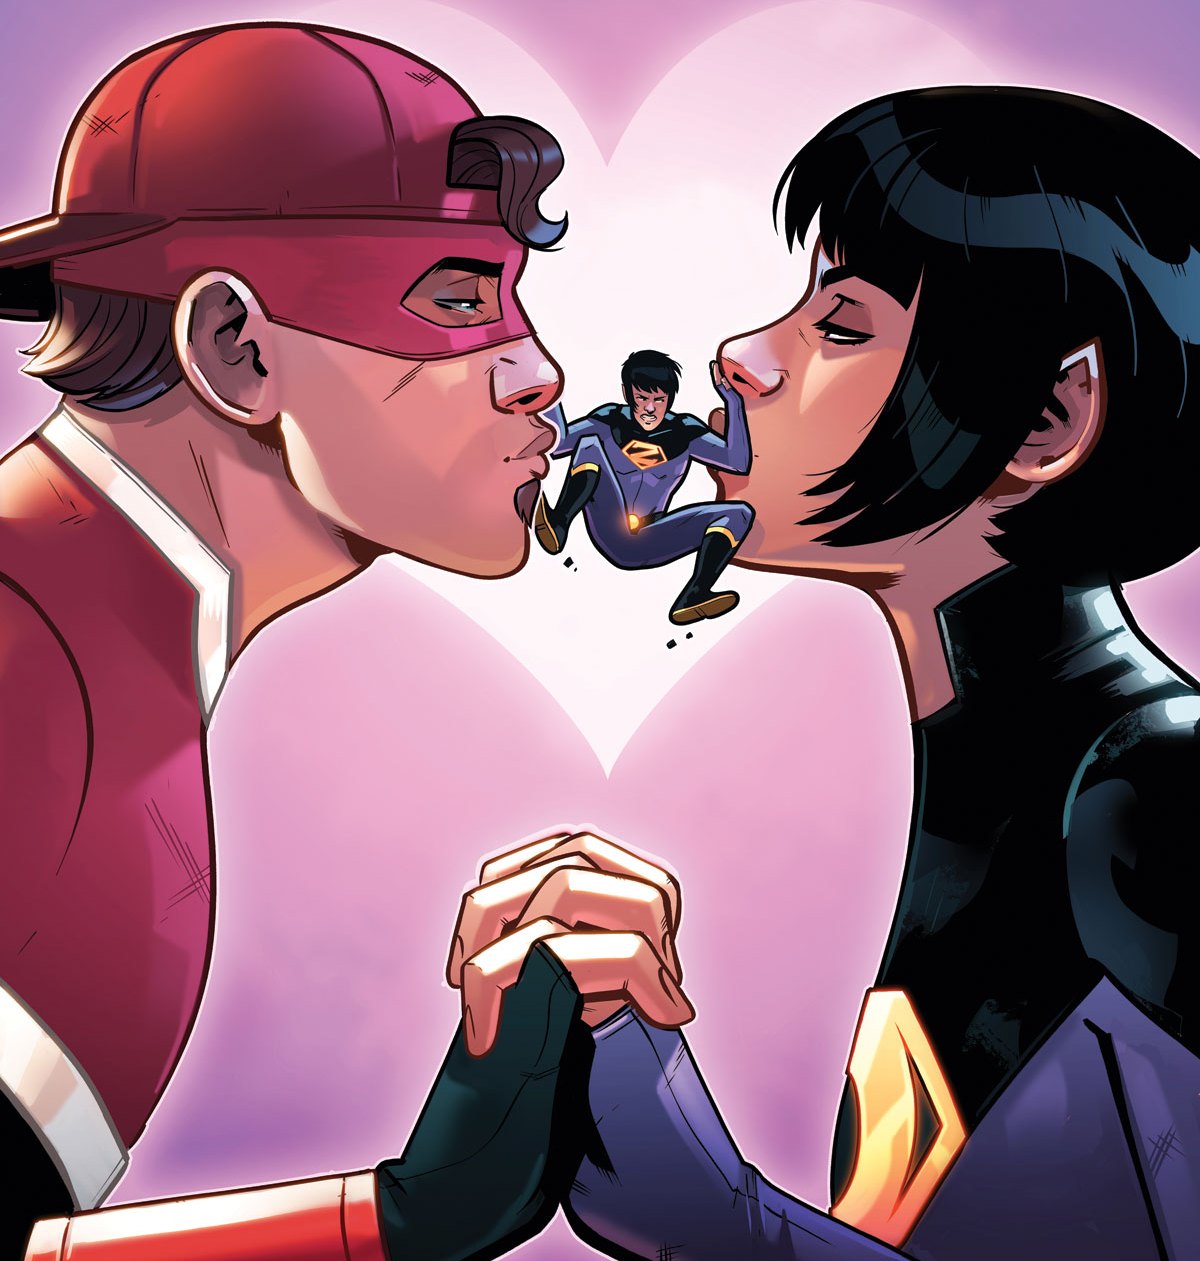 Wonder Twins #4 review: Relationships